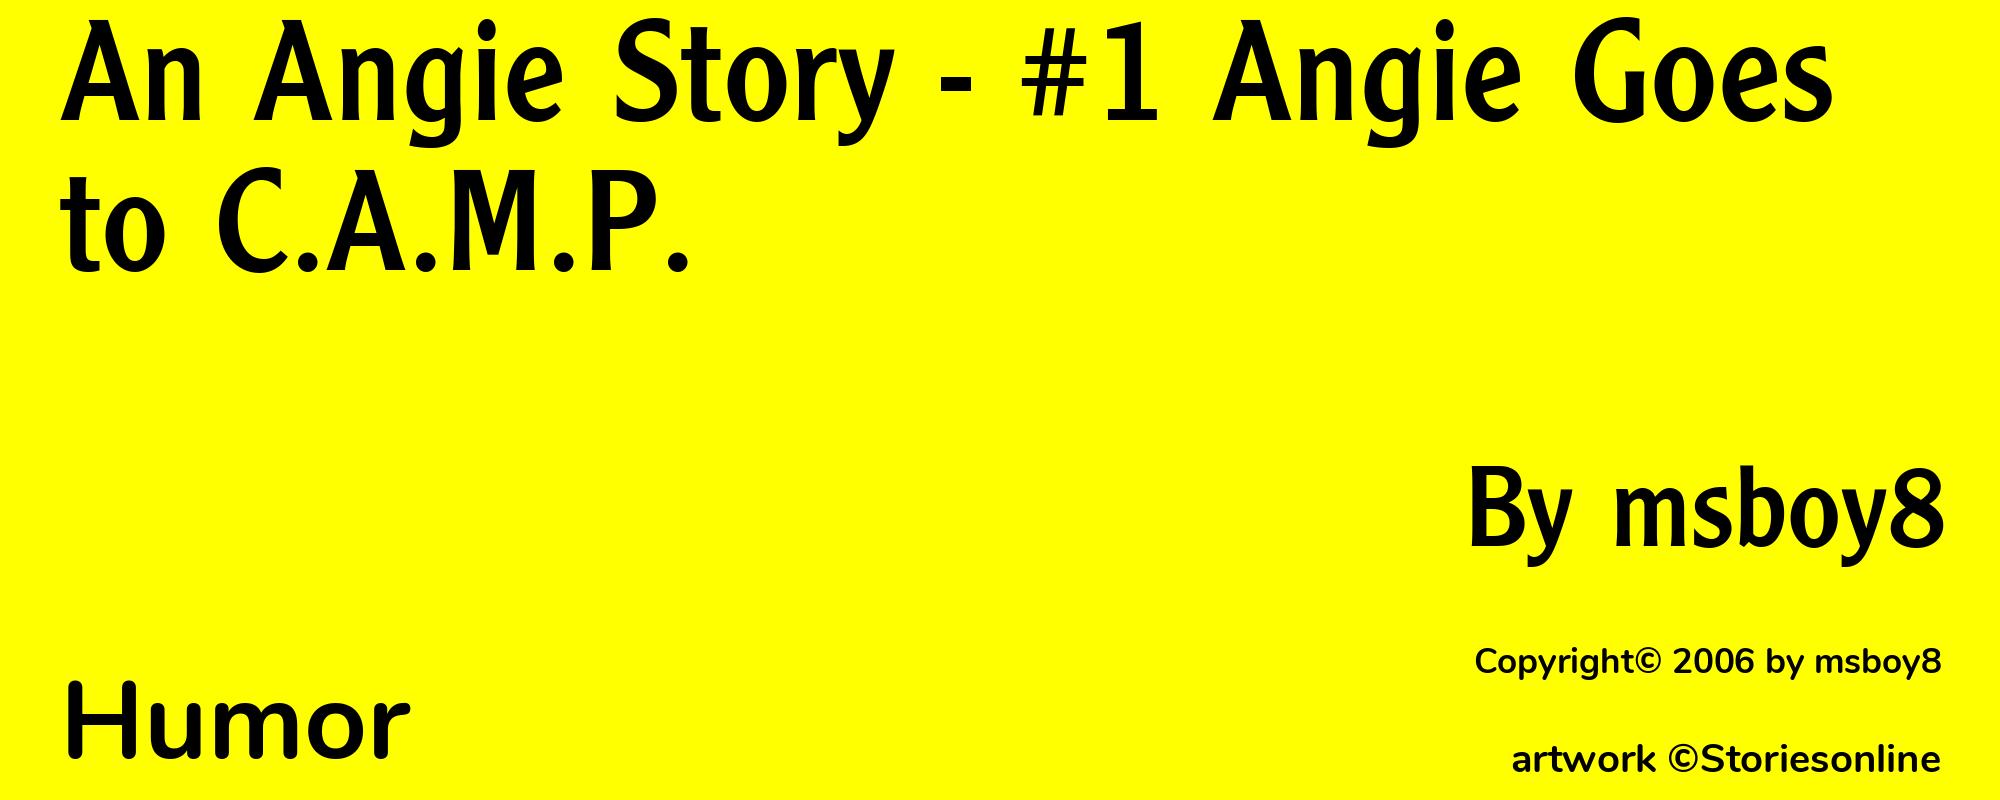 An Angie Story - #1 Angie Goes to C.A.M.P. - Cover